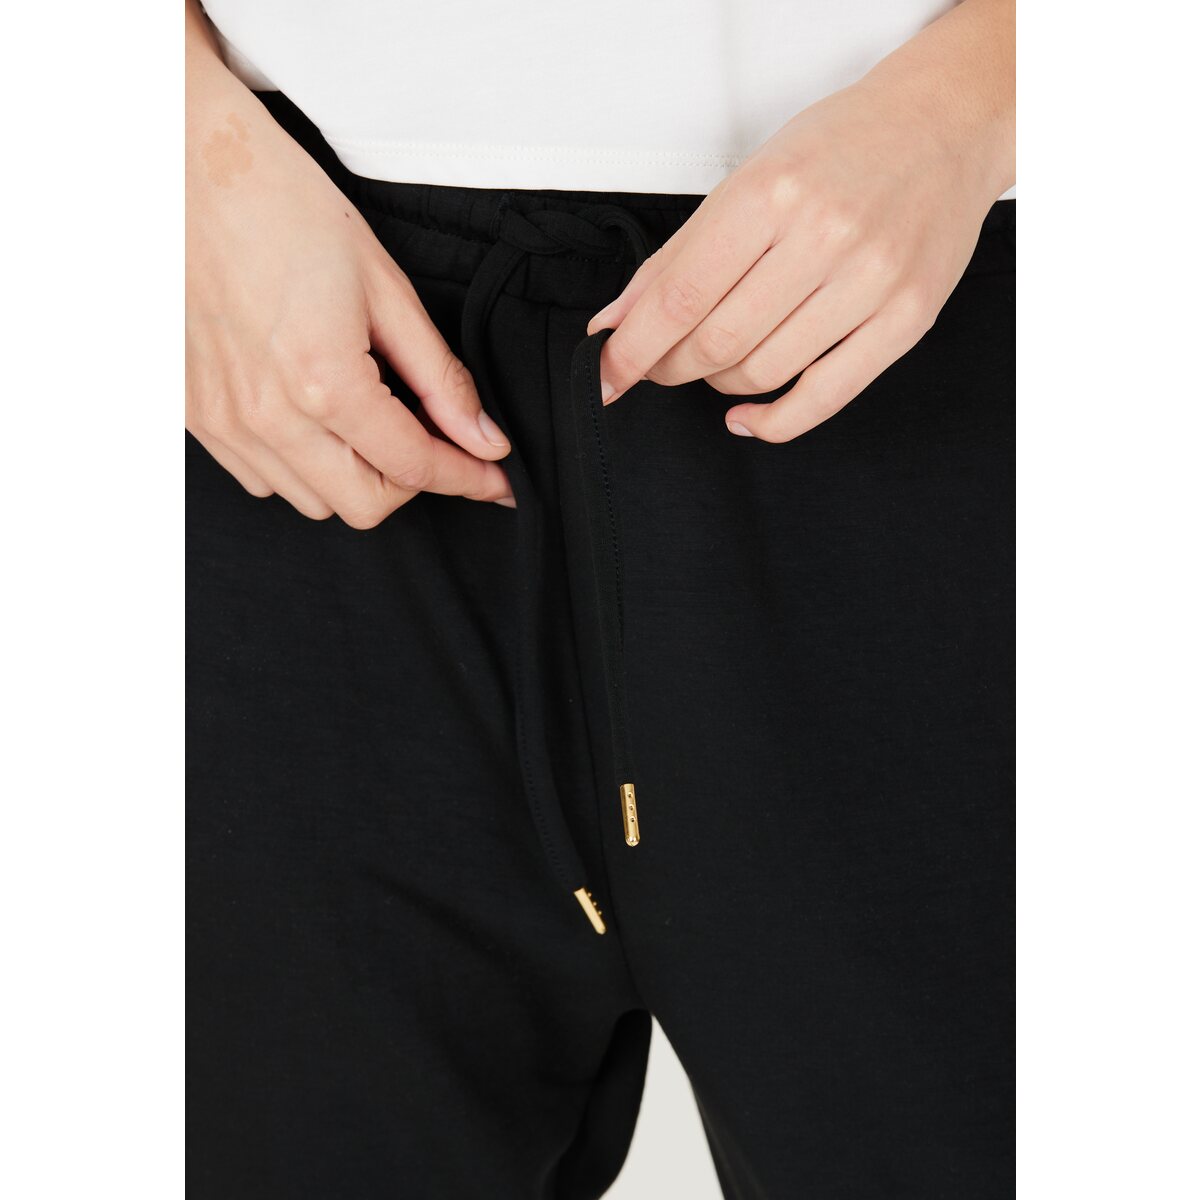 Athlecia Jacey V2 Womenswear Sweat Pants - Black 3 Shaws Department Stores